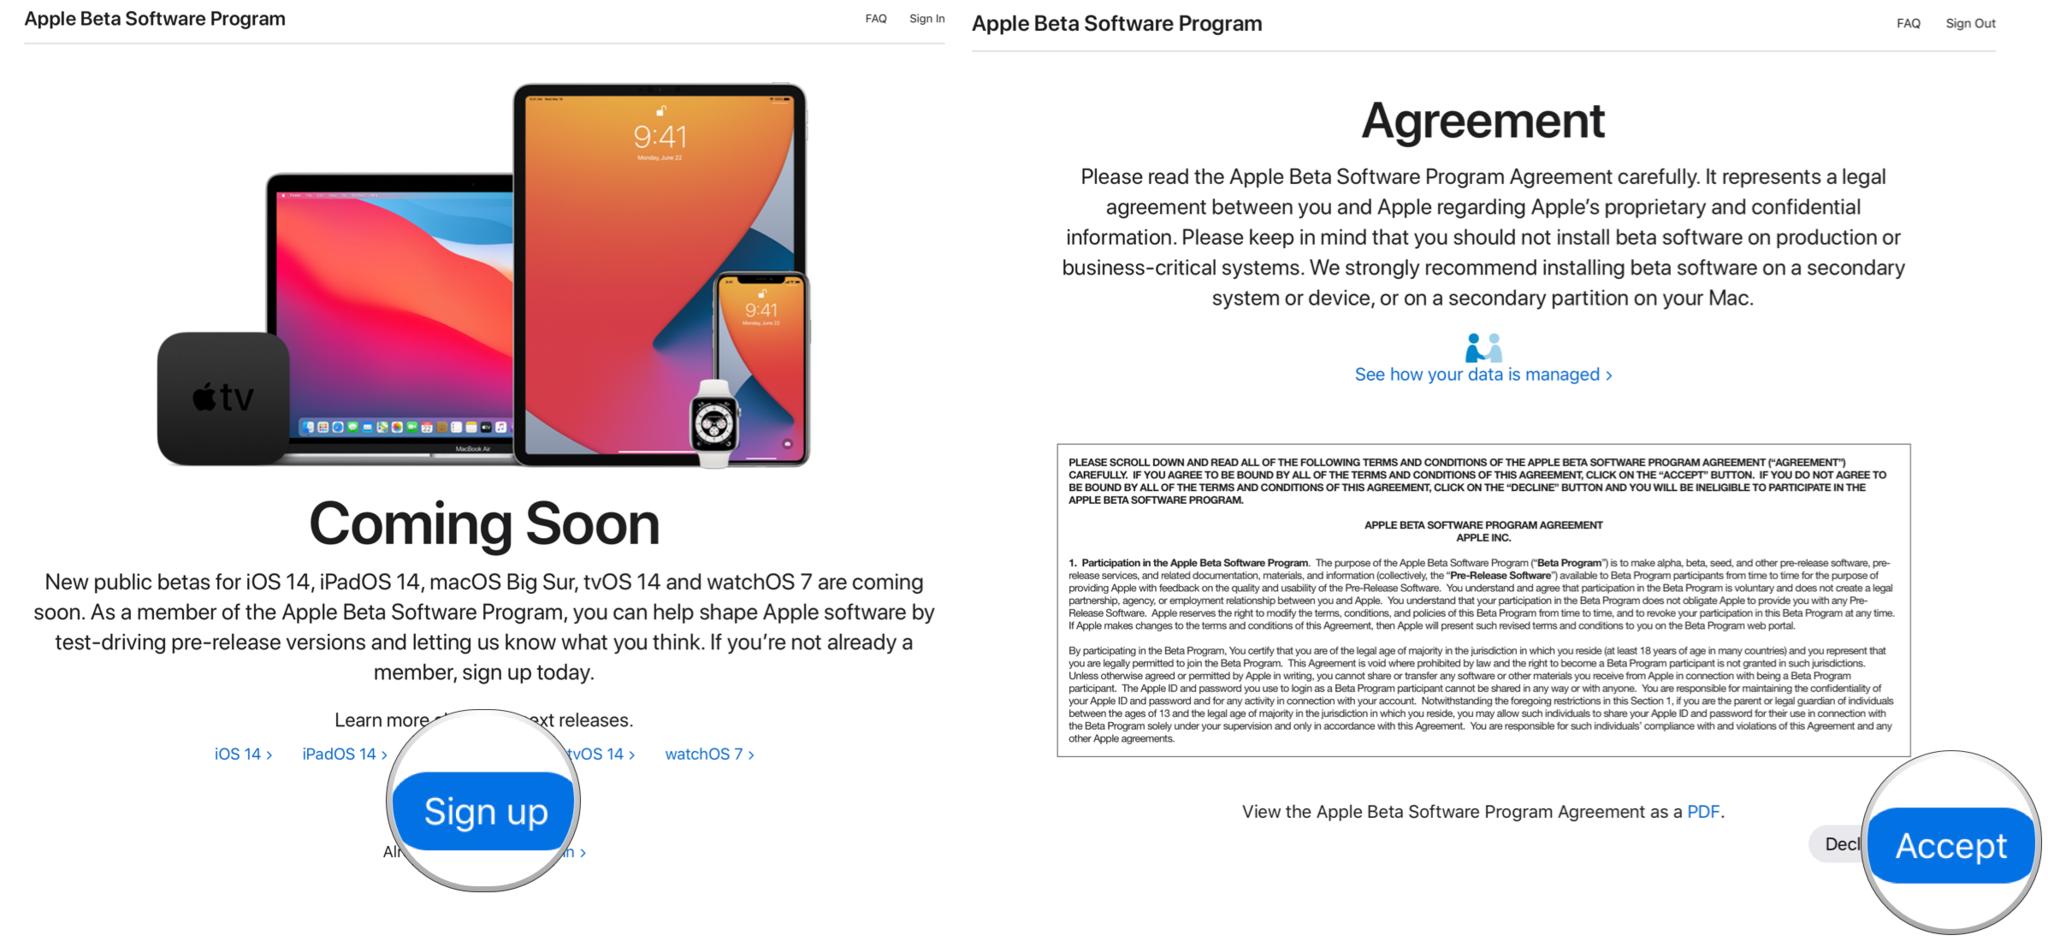 Sign up for the Apple Public Beta program by showing steps: Go to the Public Beta page and click Sign Up, then read and Agree to the software agreement